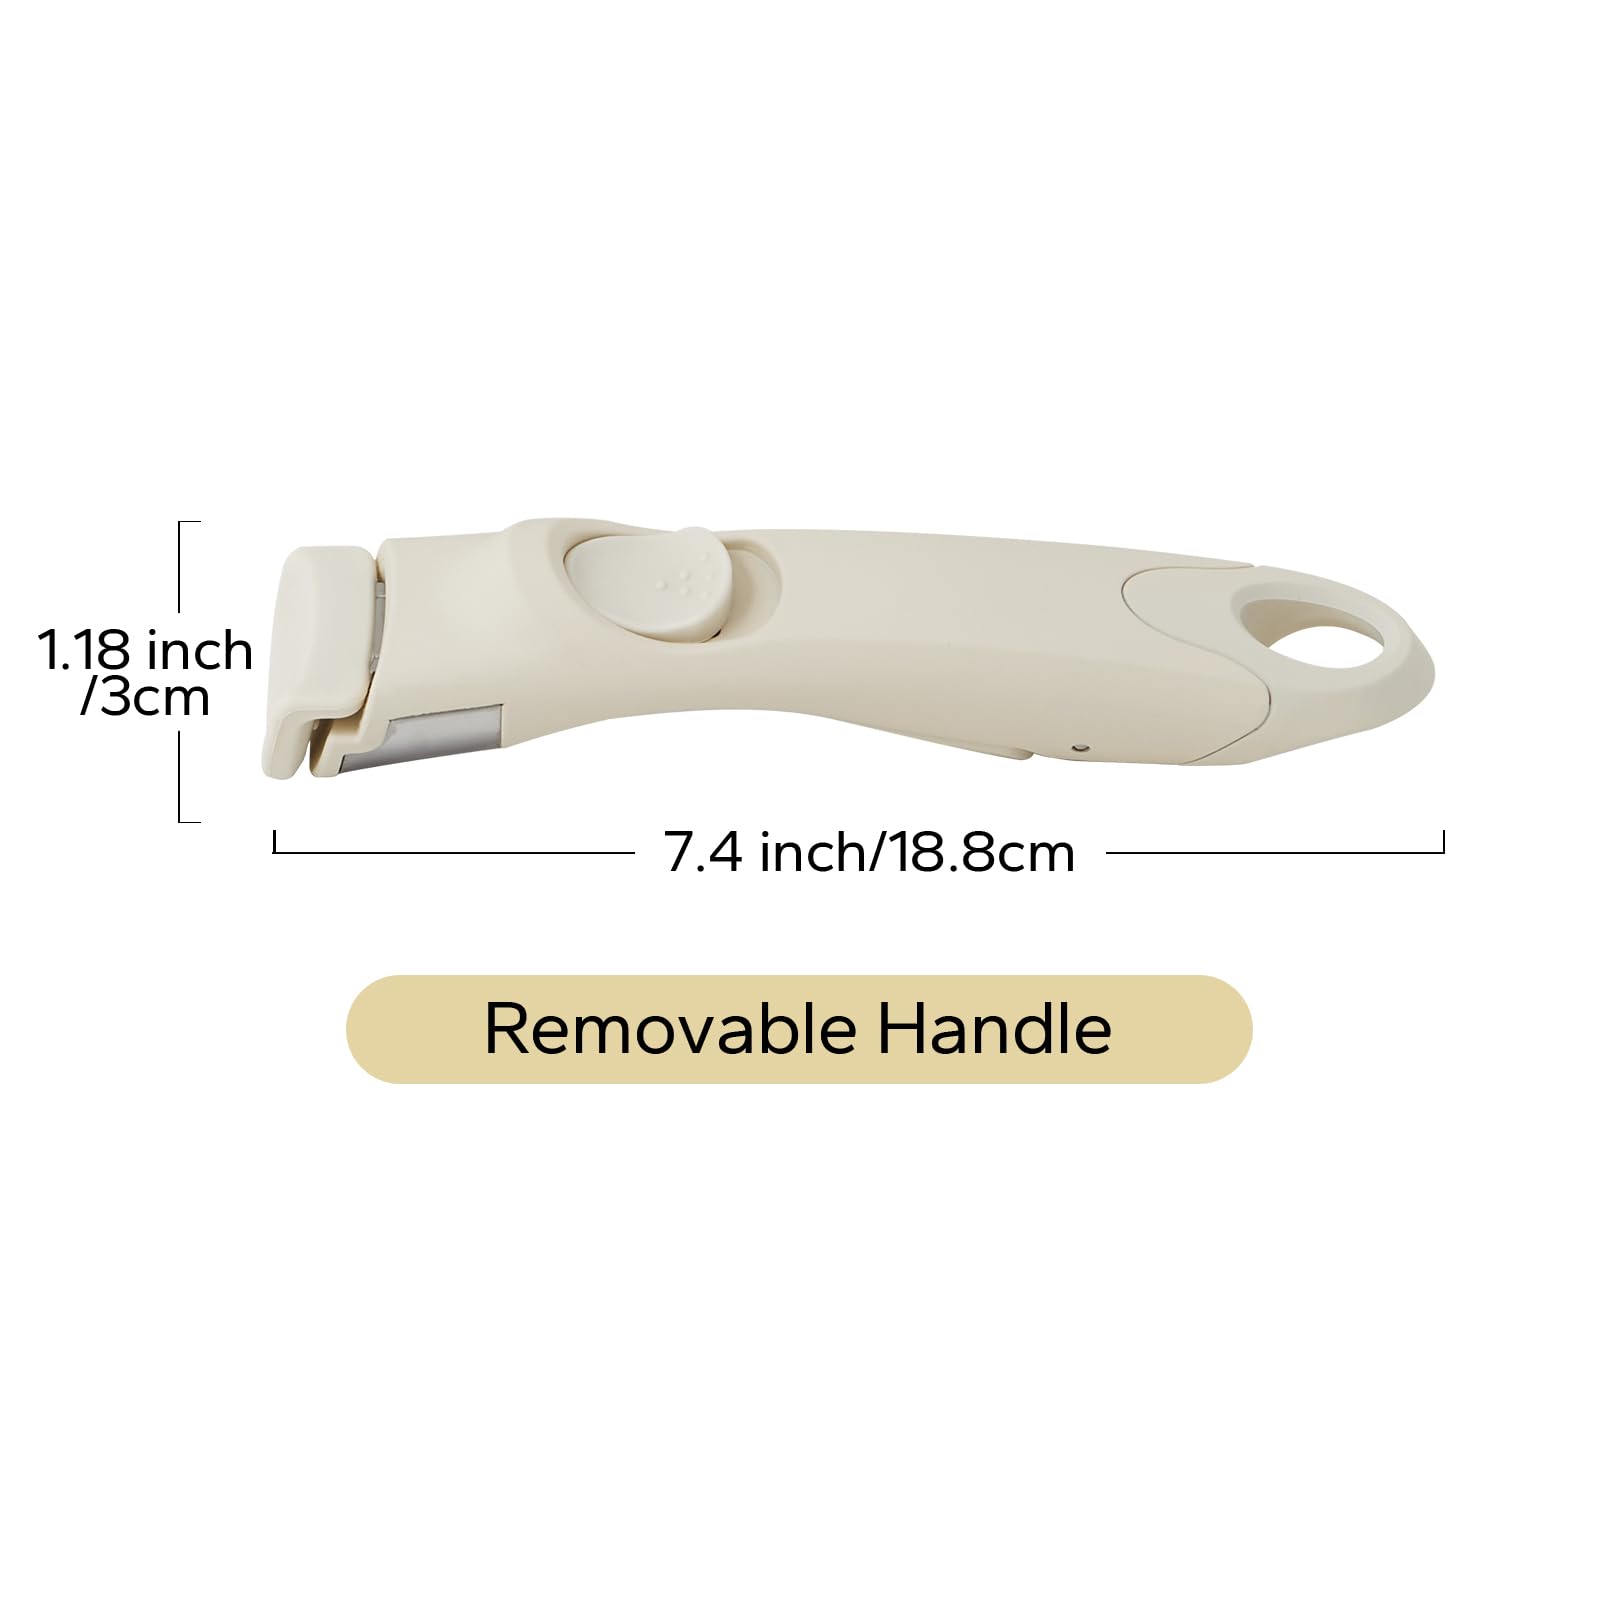 Redchef Removable Handle White, Detachable Handle For Cookware